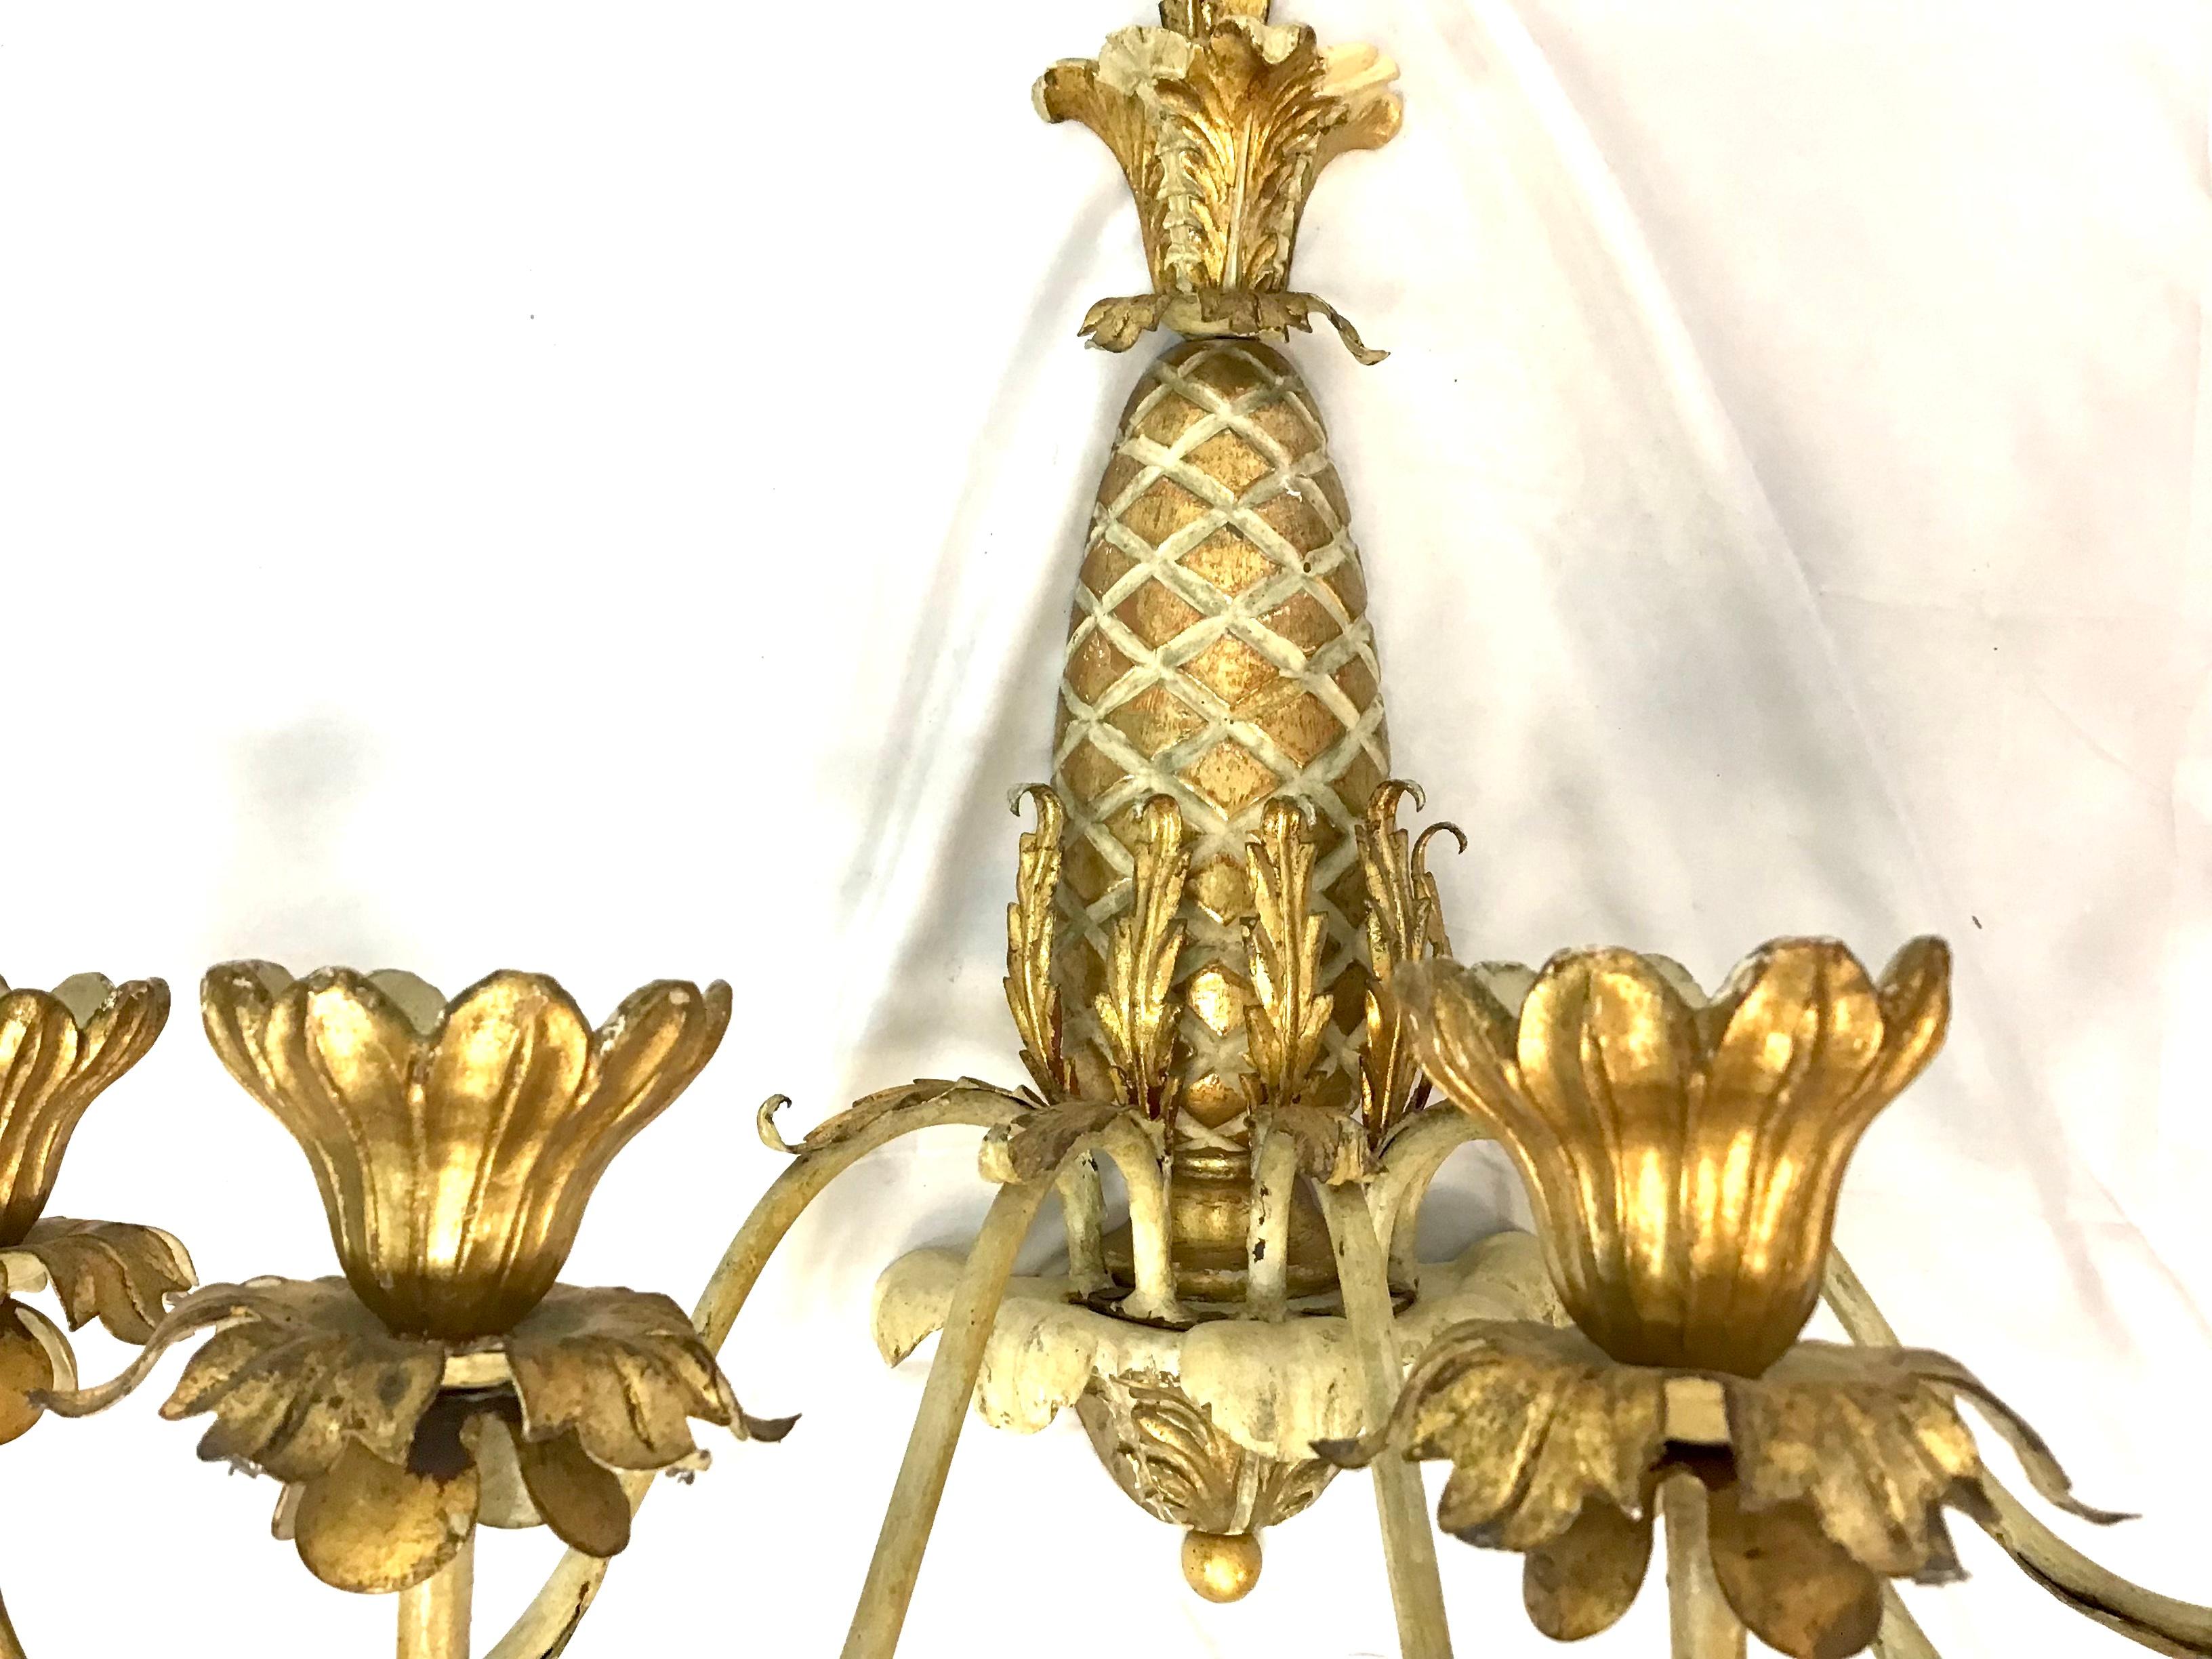 20th Century Antique Large Italian Tole Carved Wood Pineapple Candle Wall Sconces, a Pair